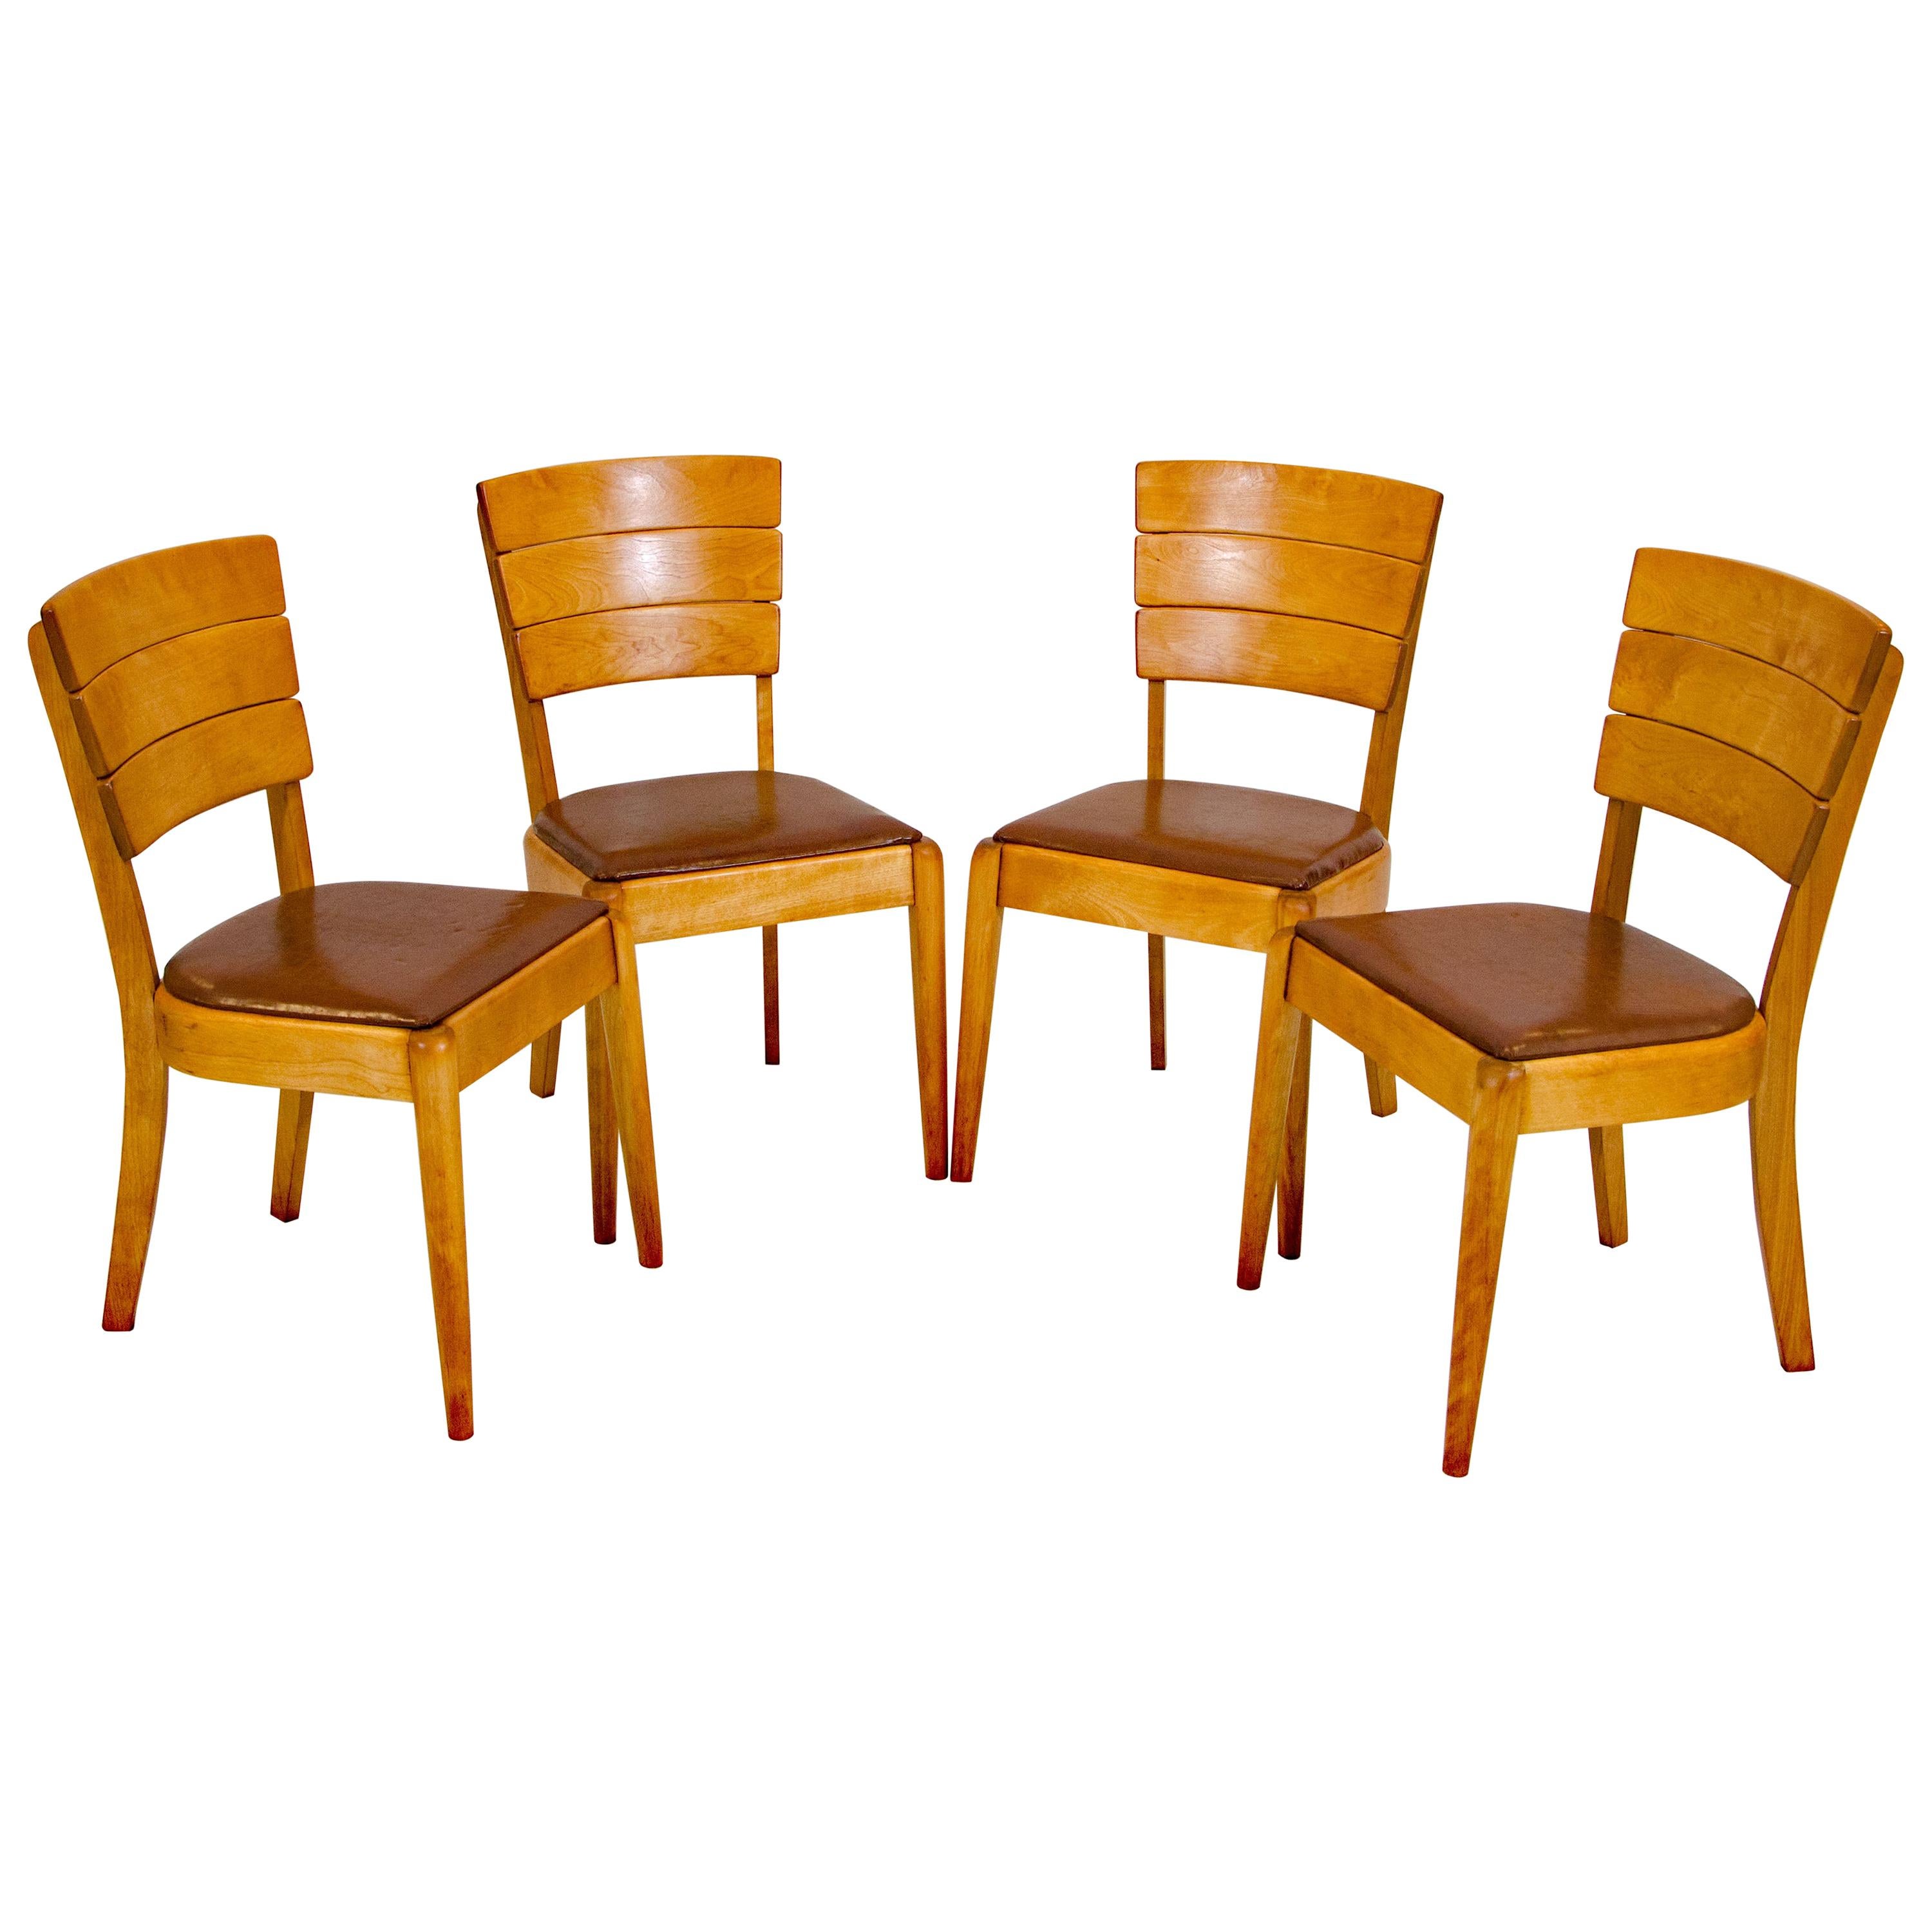 Set of Four Heywood Wakefield Dining Chairs, C3714